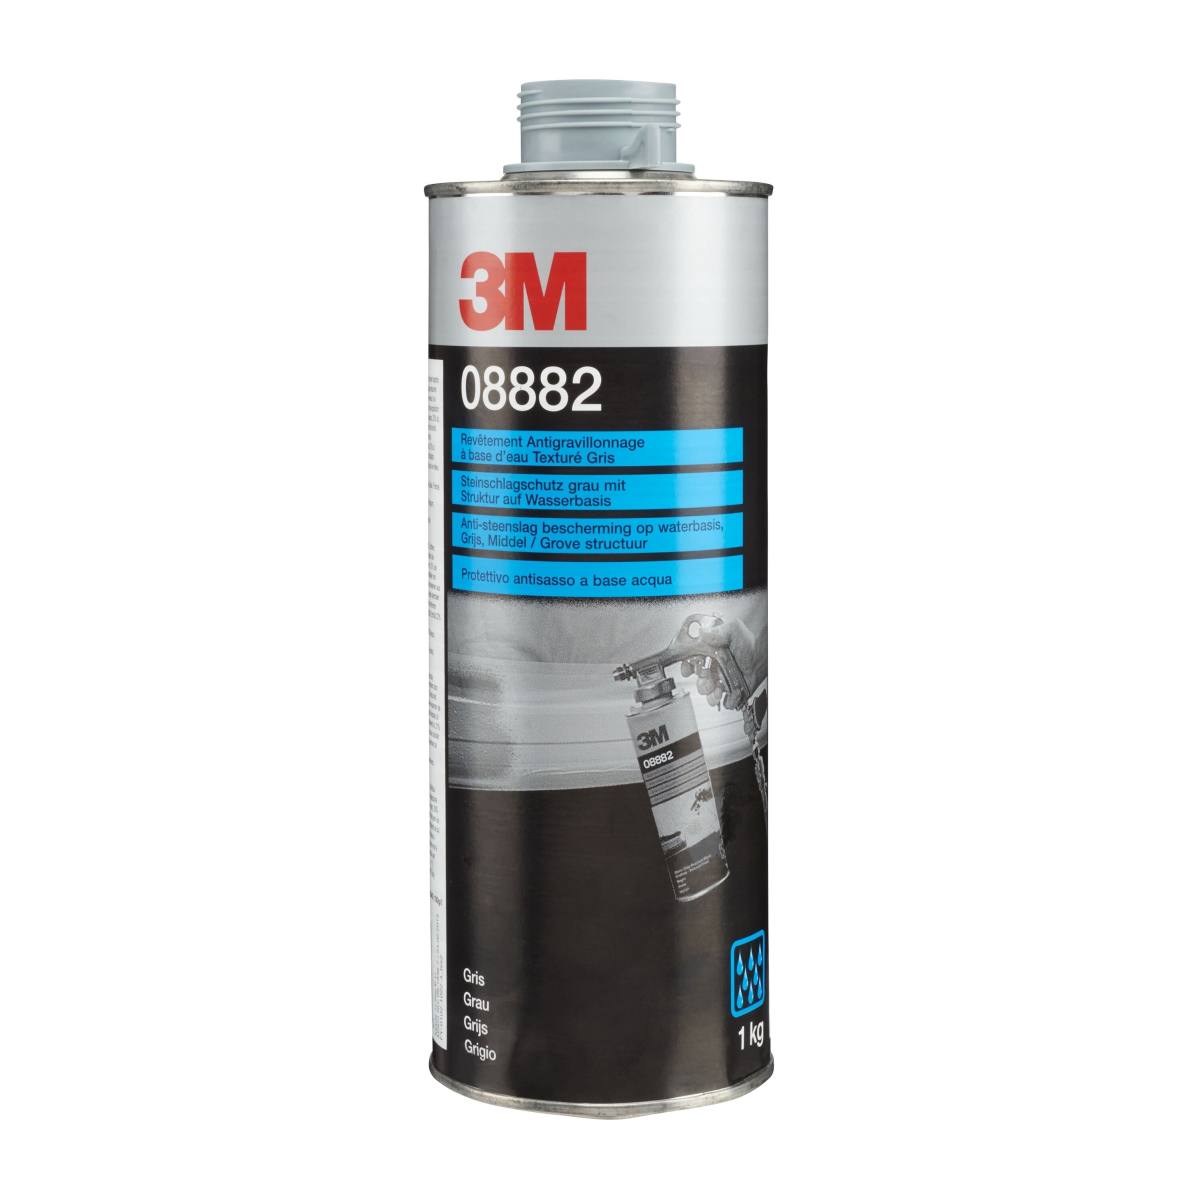 3M stone chip protection water-based / with structure, gray, 1kg, #08882